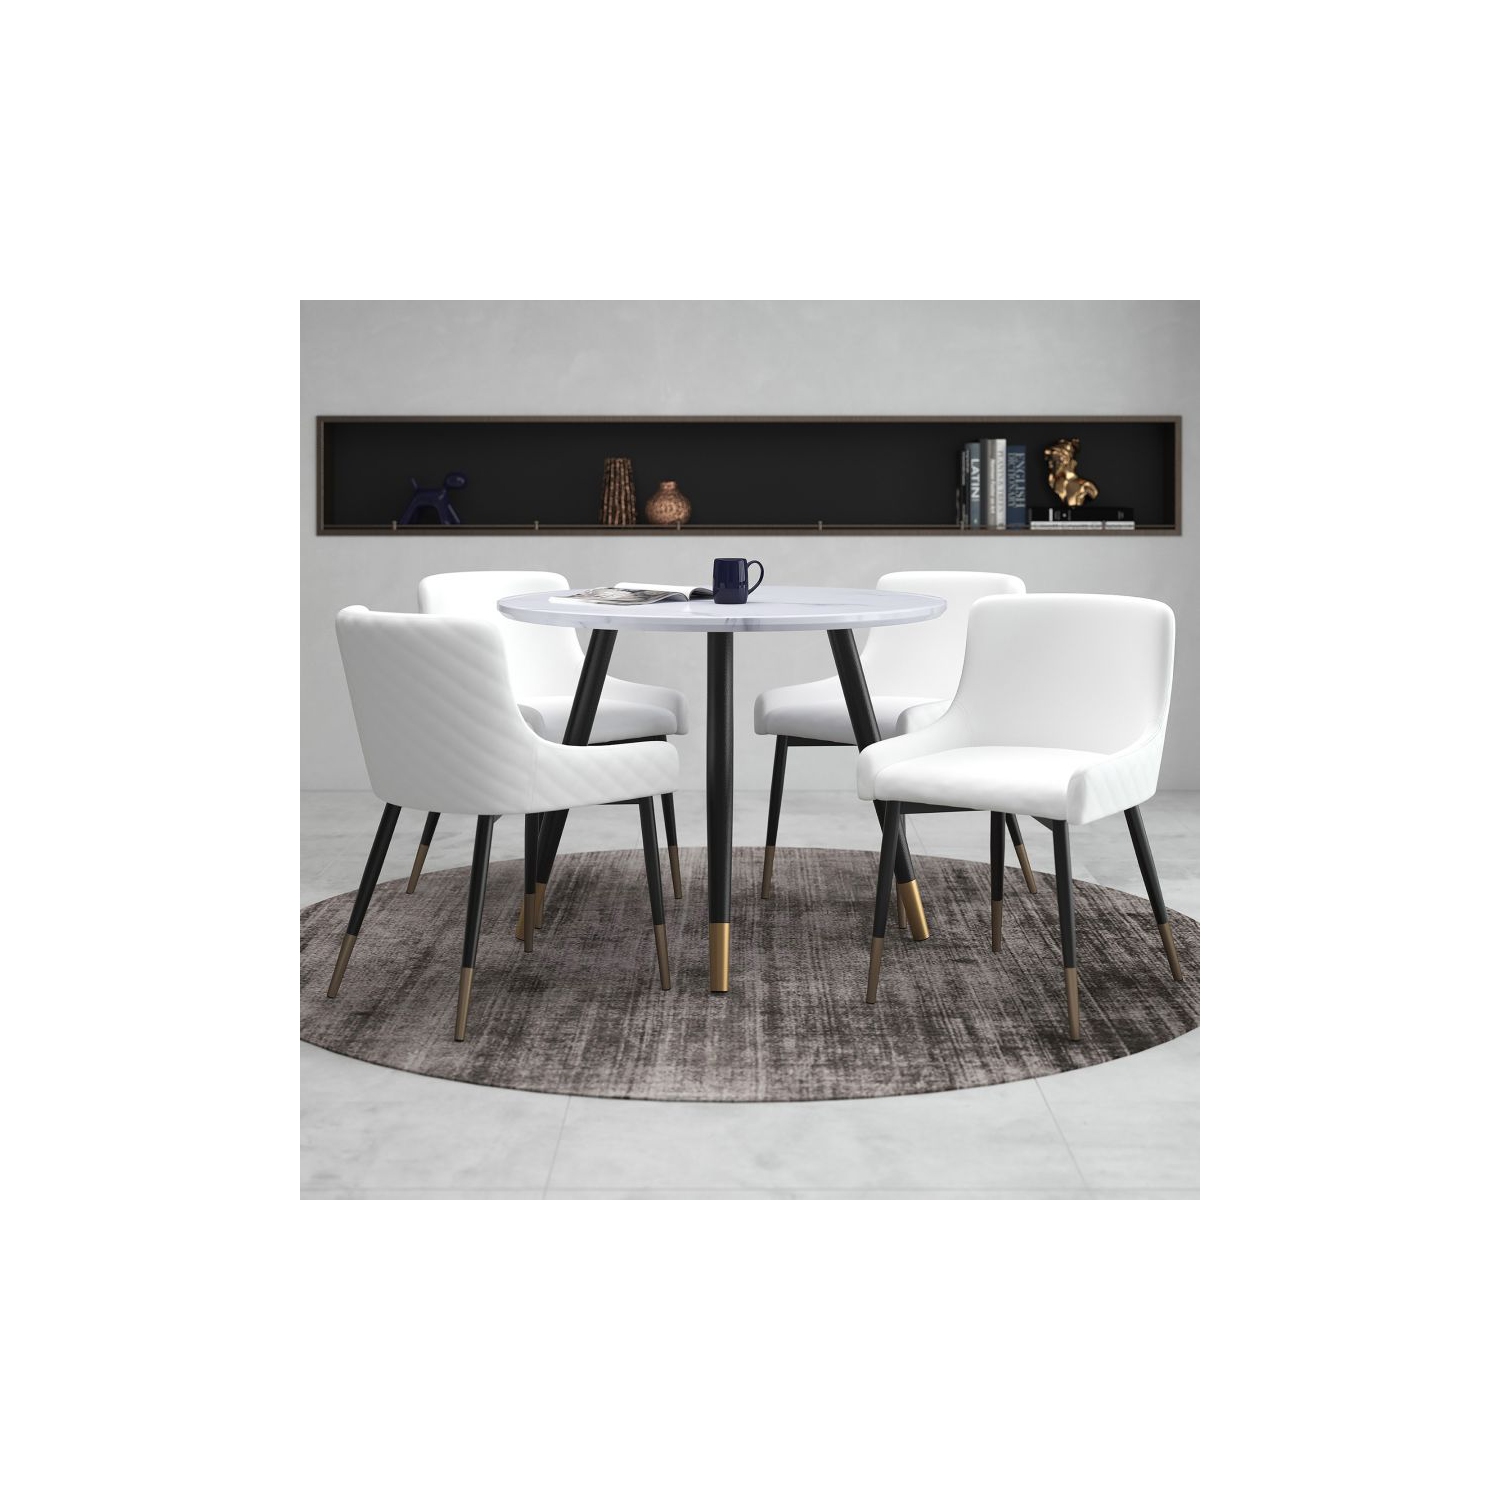 Cosmic Homes 5pc Dining Set in White with White Chair, Modern Mid-century Dining Set of 4, White Dining Table Set, Contemporary Style, MDF Table Top with Marble